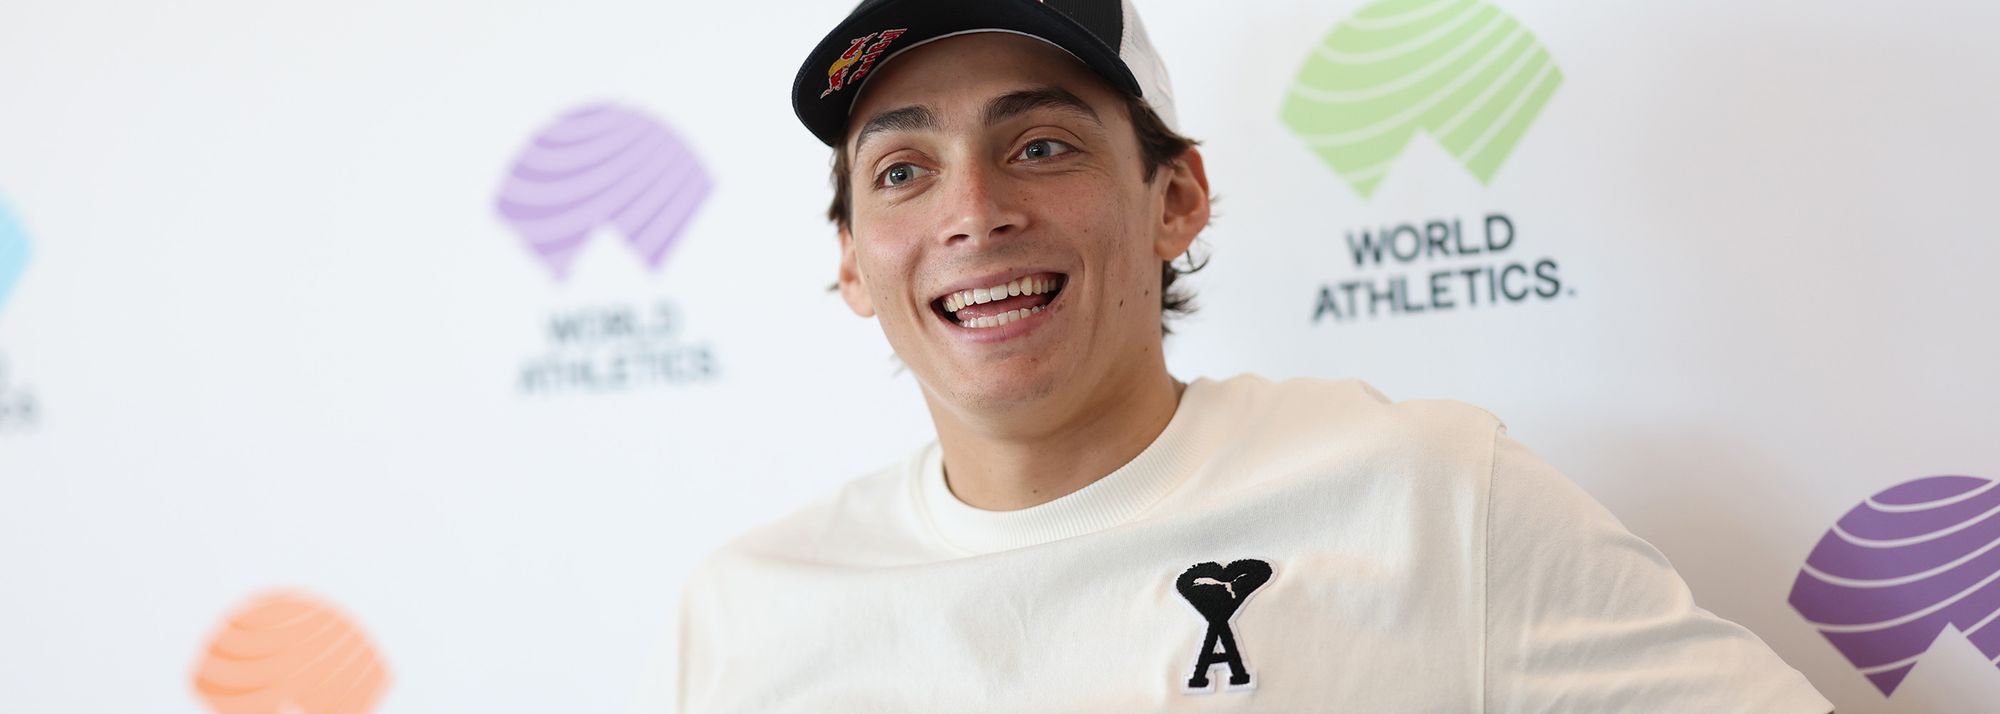 Mondo Duplantis started 2022 with some clear aims: to win world titles both indoors and outdoors, and improve his own world record. The pole vault prodigy achieved it all